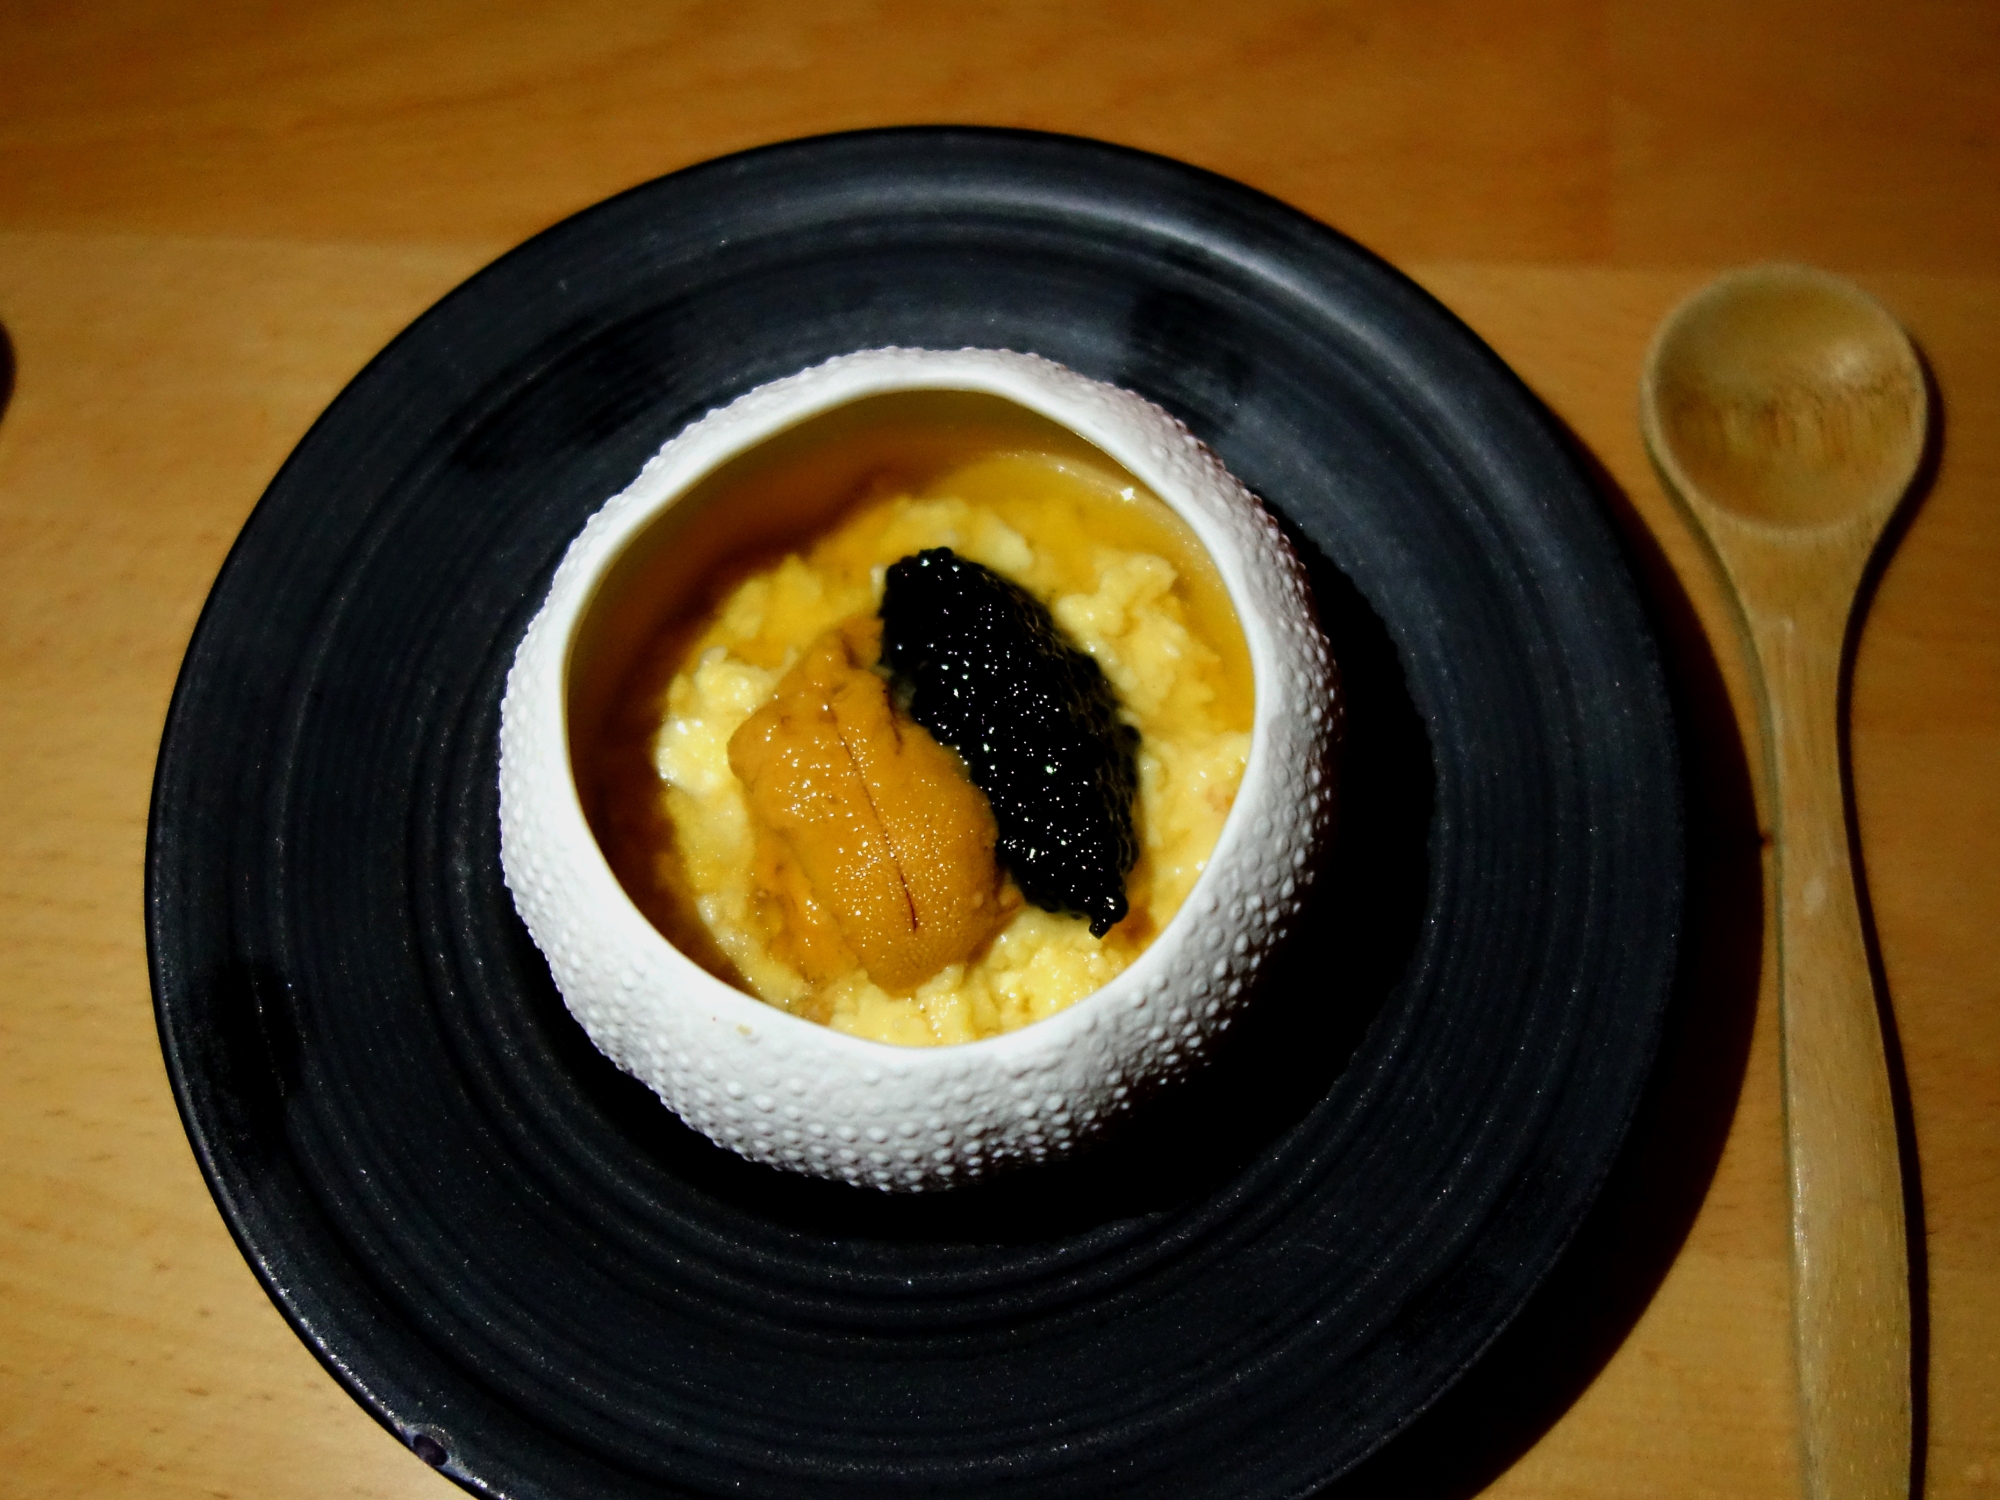 Sakamai – Egg on egg on egg – sea urchin, aka uni, sturgeon caviar and scrambled egg – created by George himself. You have to scoop up from the bottom when you eat this so you can get a bit of each element on the spoon with each bite. It is a luxurious dish. I think I used my finger to swipe up every last drop.